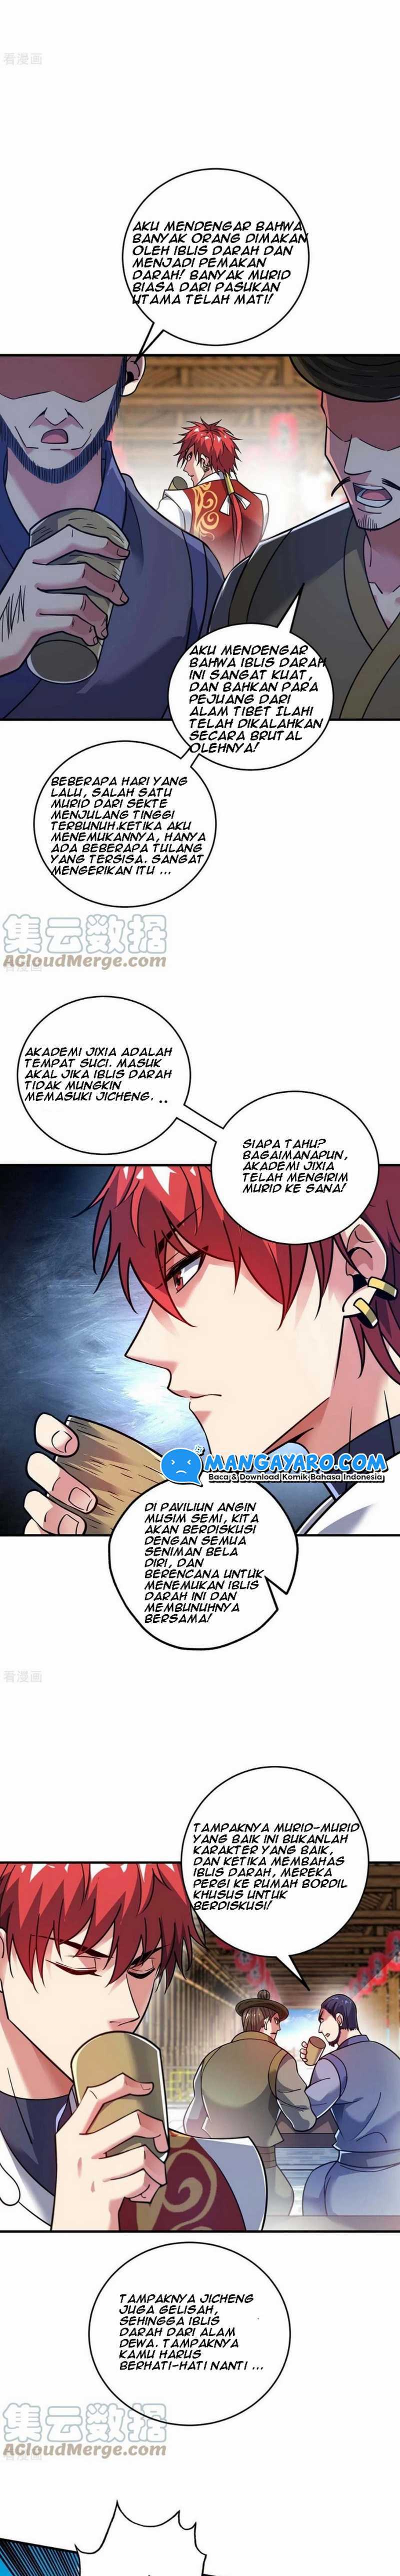 The First Son-in-law Vanguard Of All Time Chapter 156